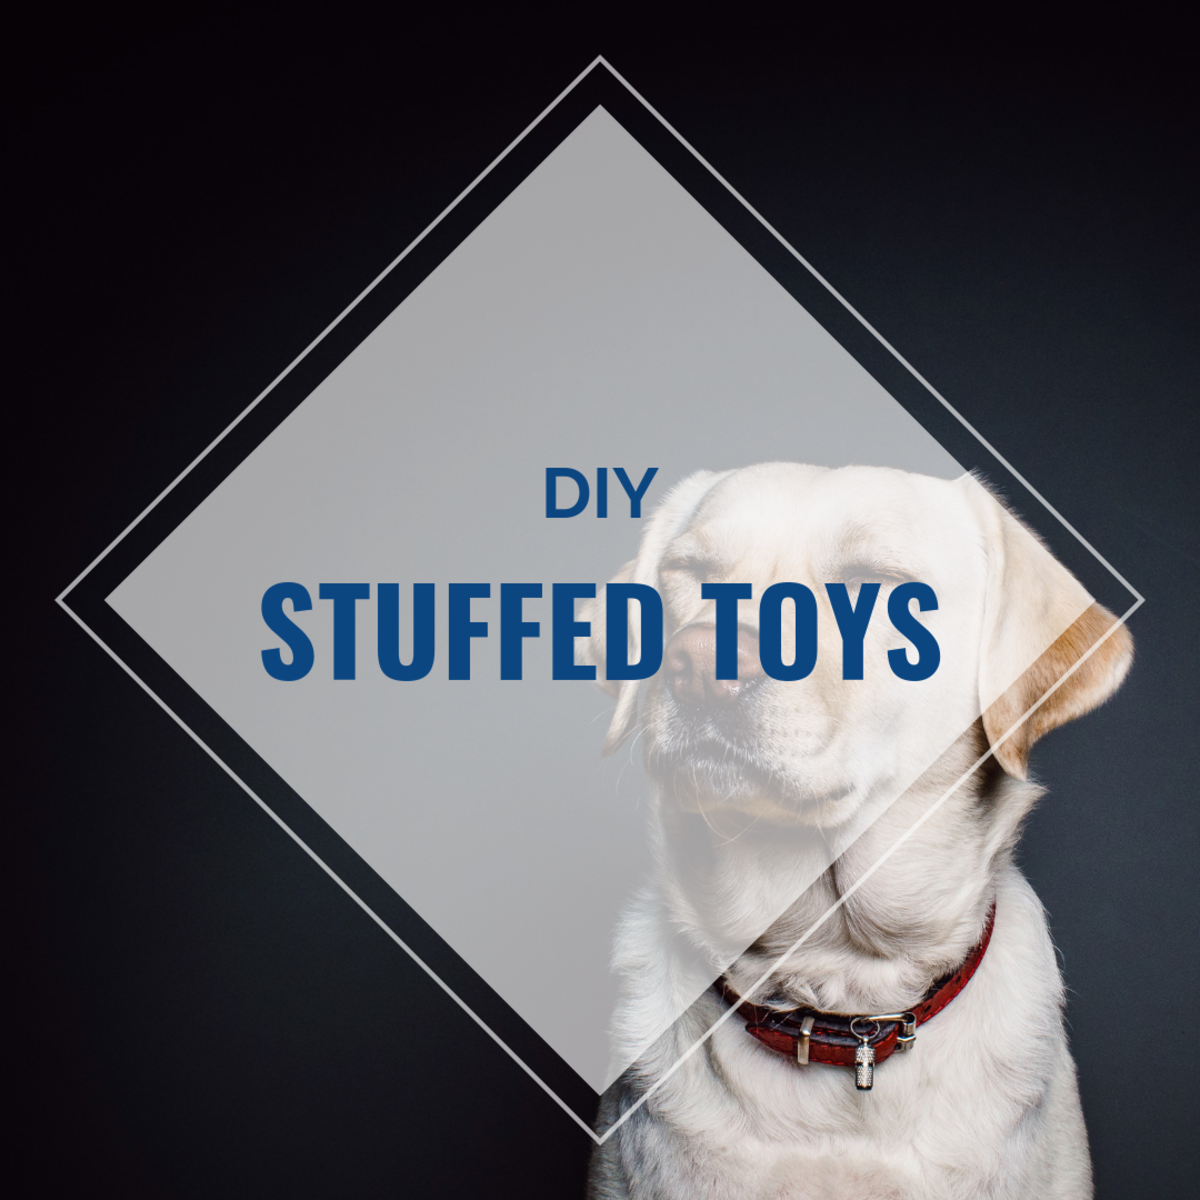 How to Make Your Own Homemade Dog Toys - PetHelpful